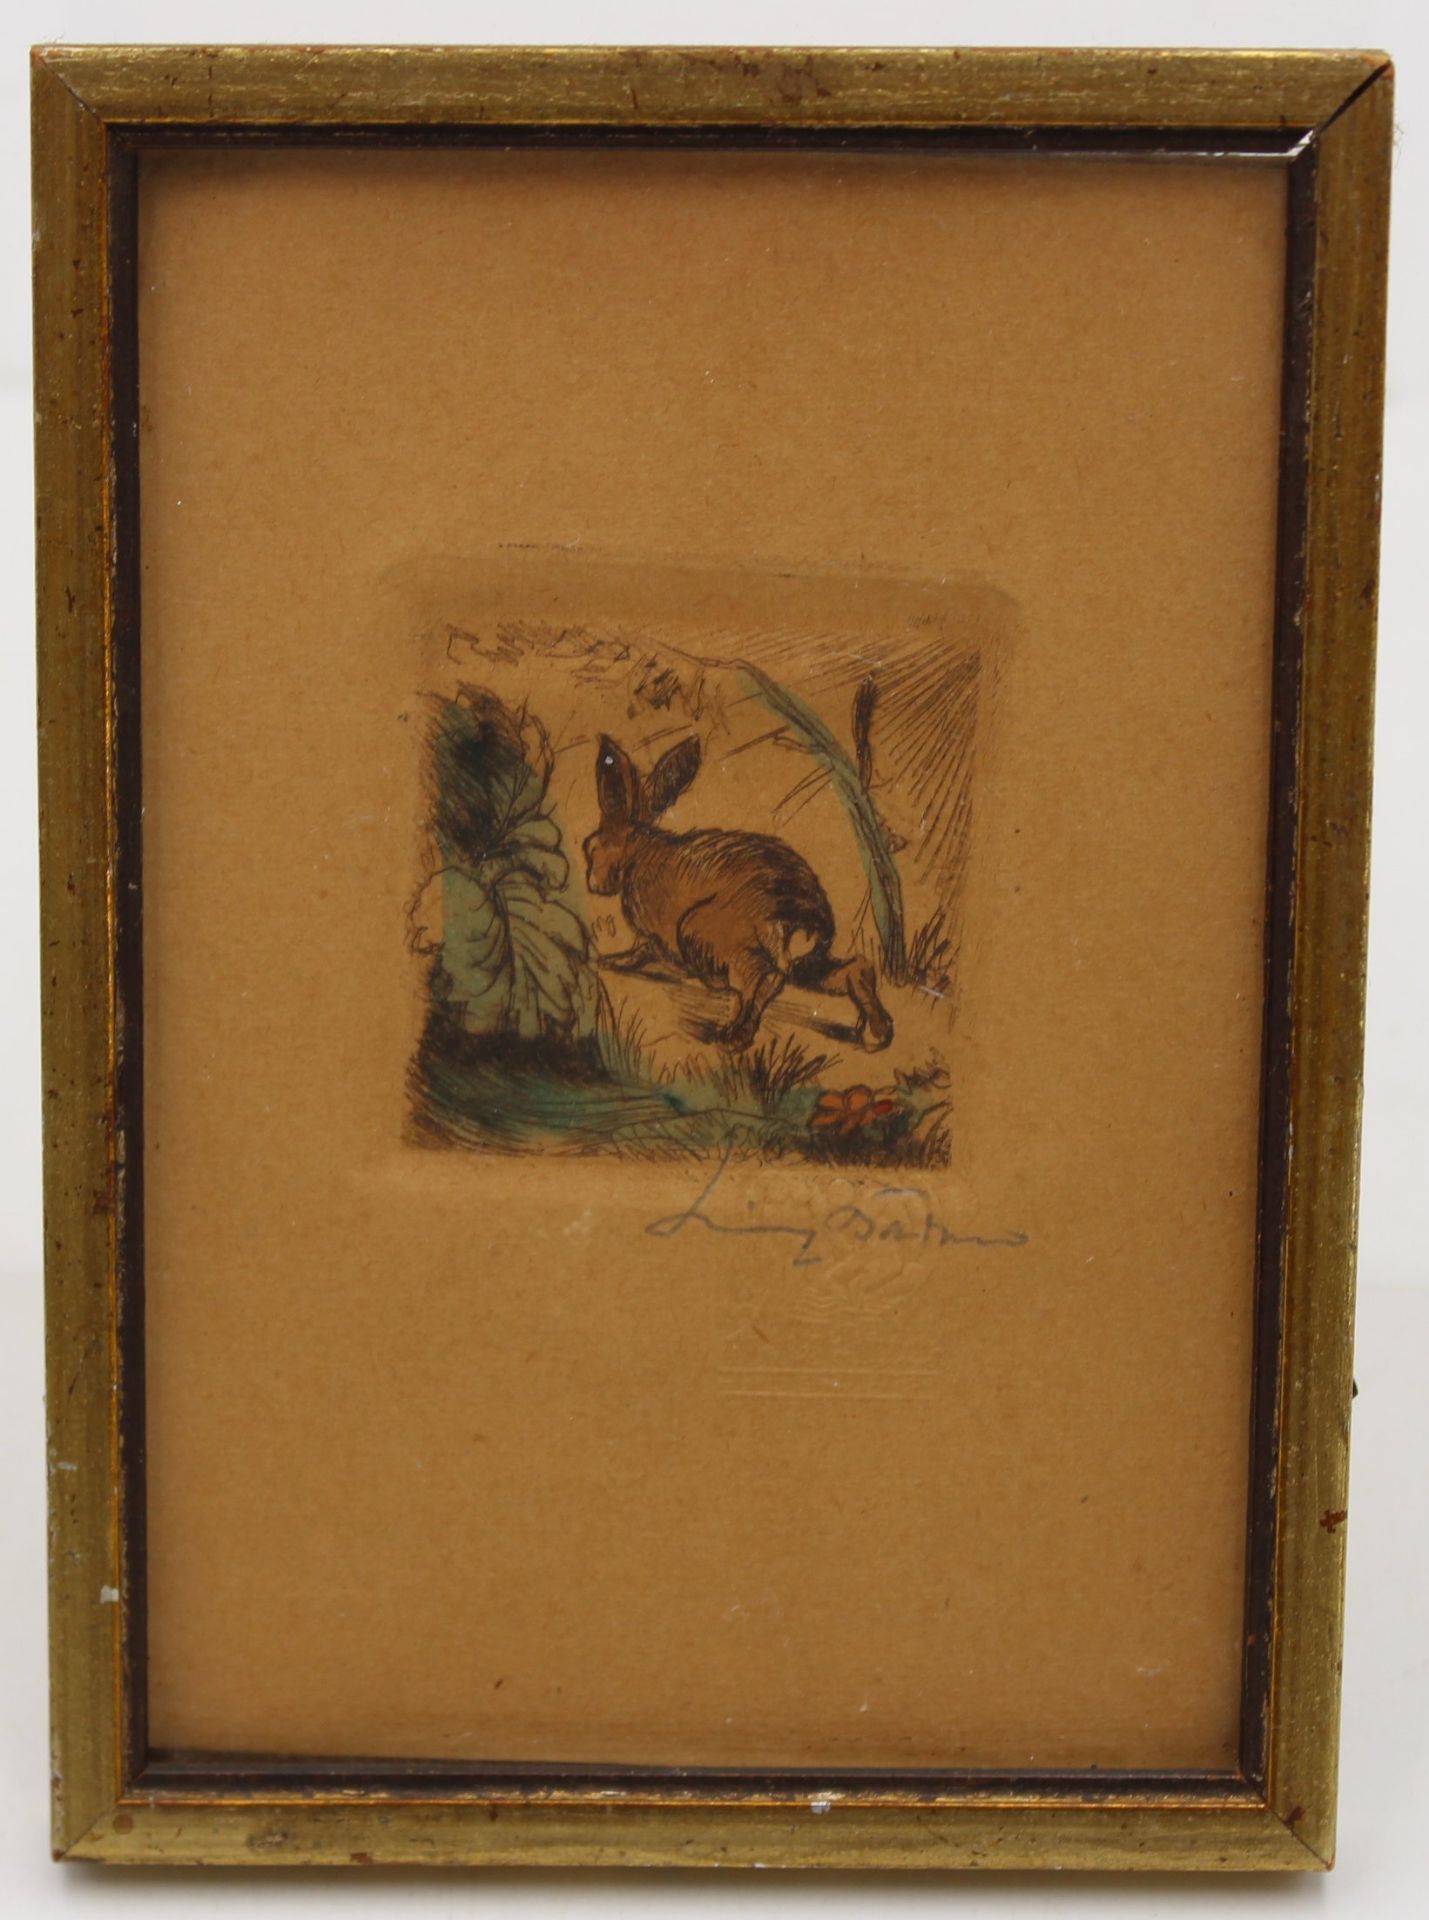 kl. unleserl.signierte Farbradierung, Hase, älter, ger./Glas. 14 x 10cm. - Image 2 of 3